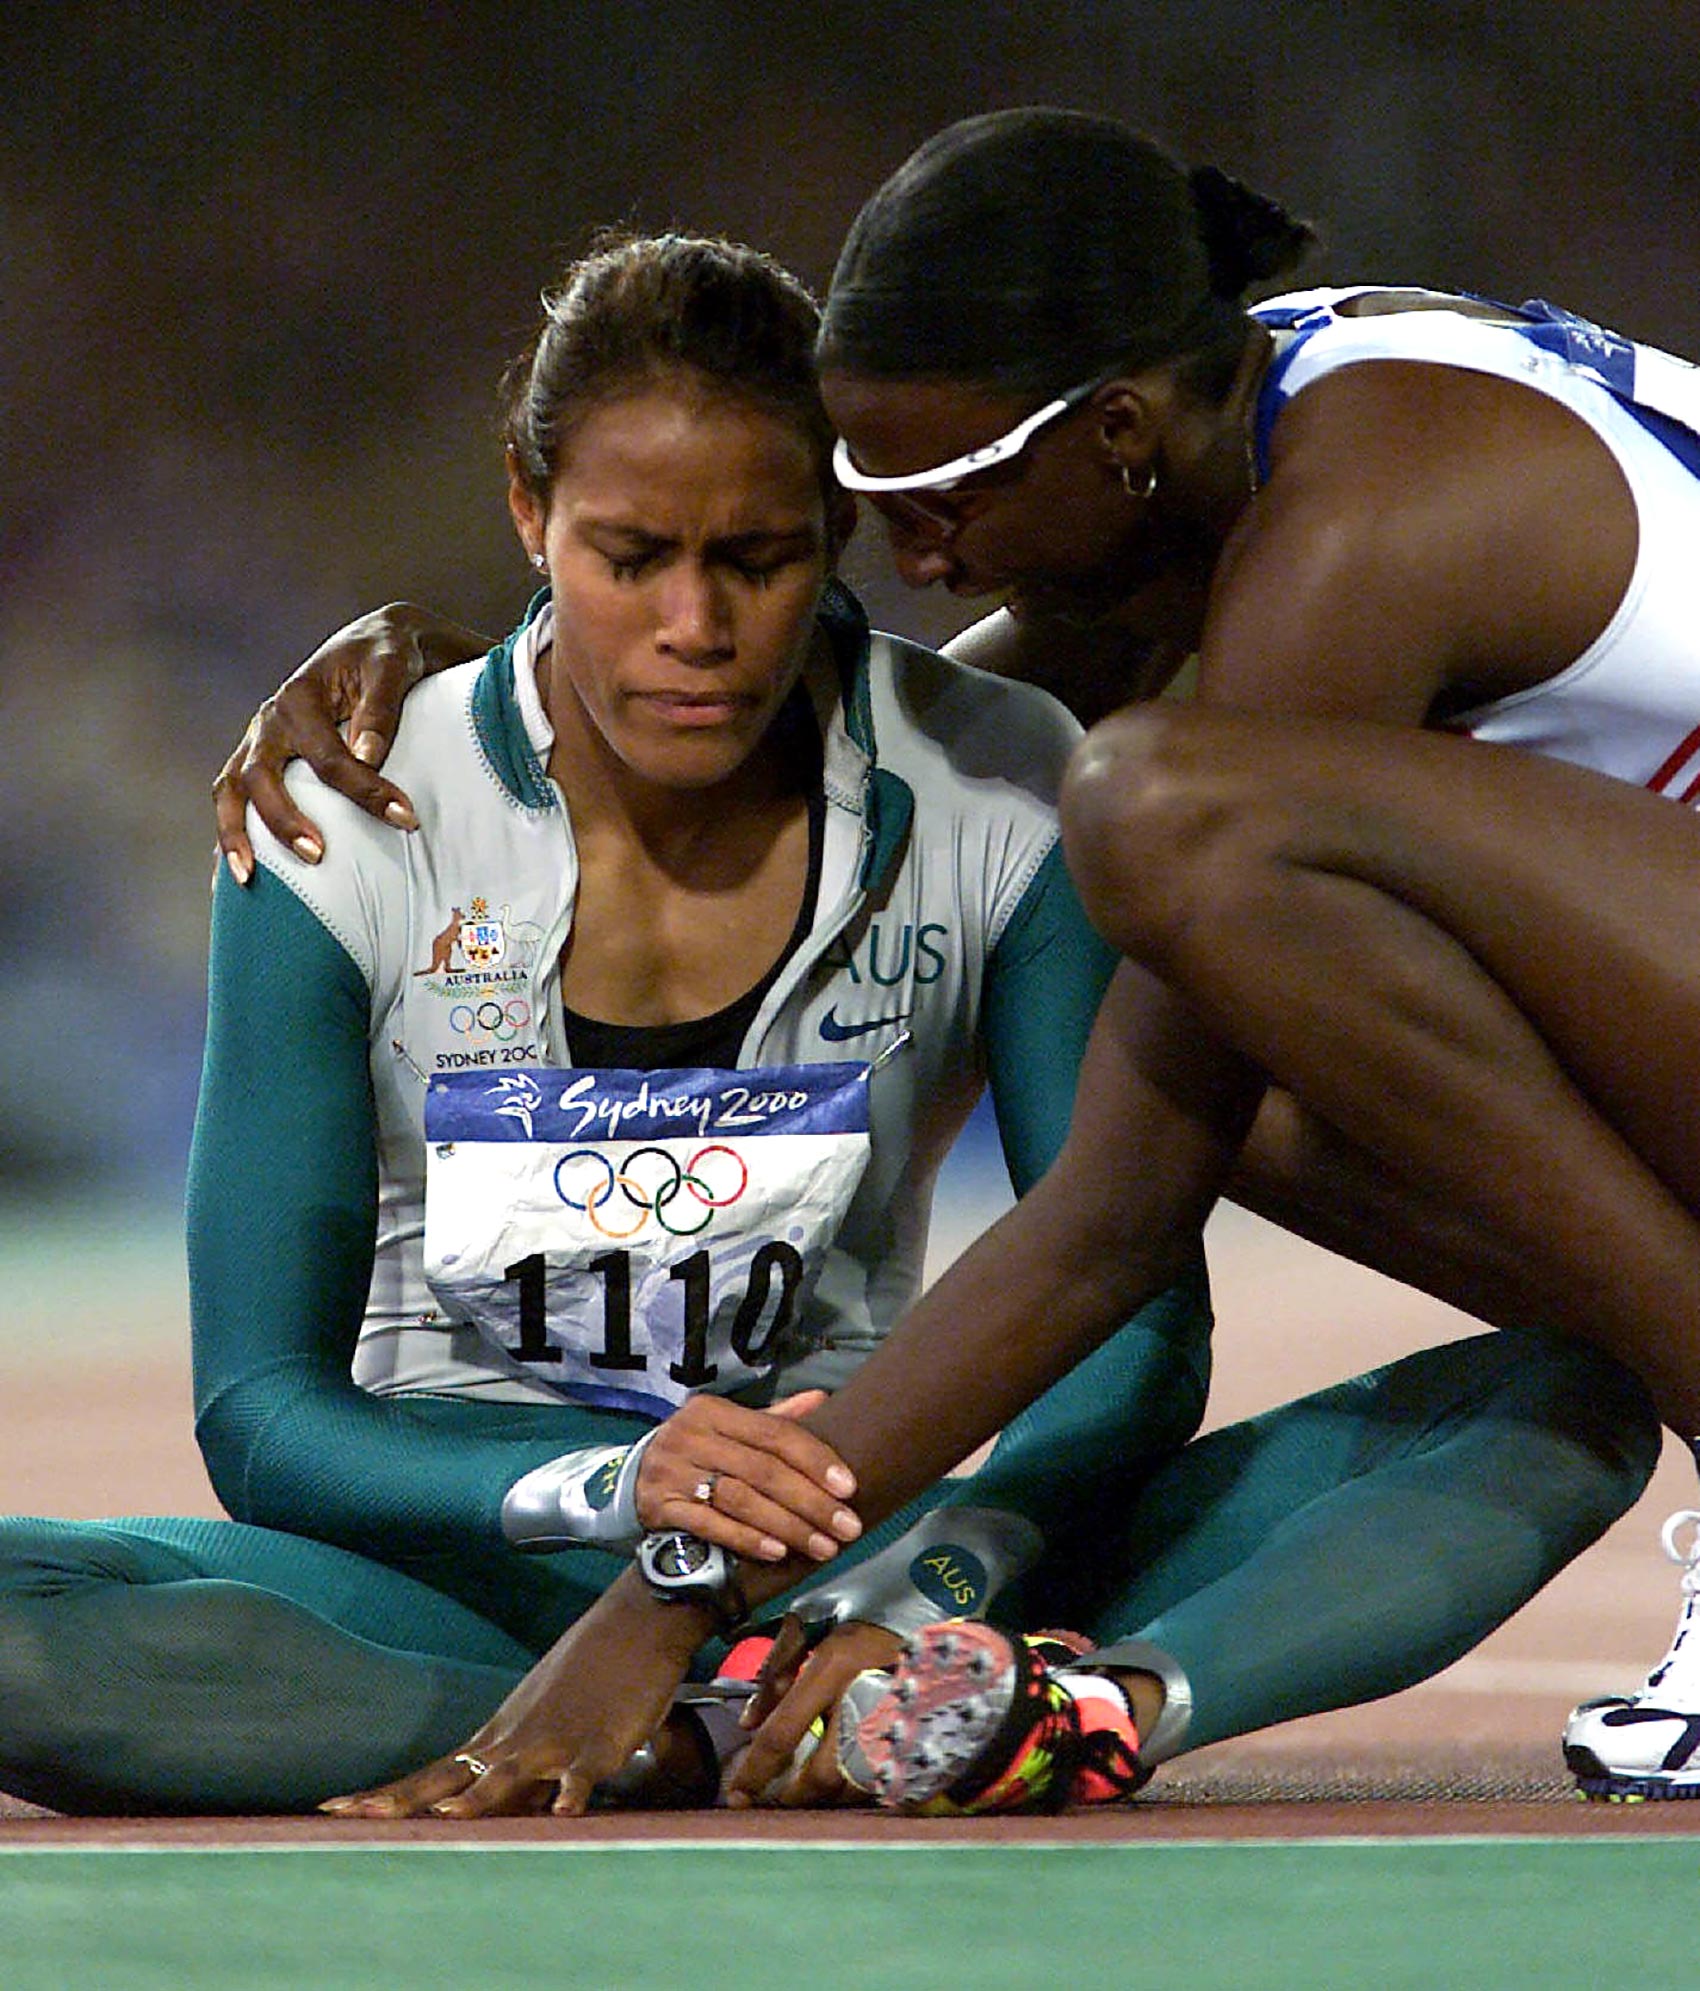   SEPTEMBER 25, 2000 : Athlete Cathy Freeman of Australia sits on track as she is congratulated by Donna Fraser of Great Britain after winning final of Women